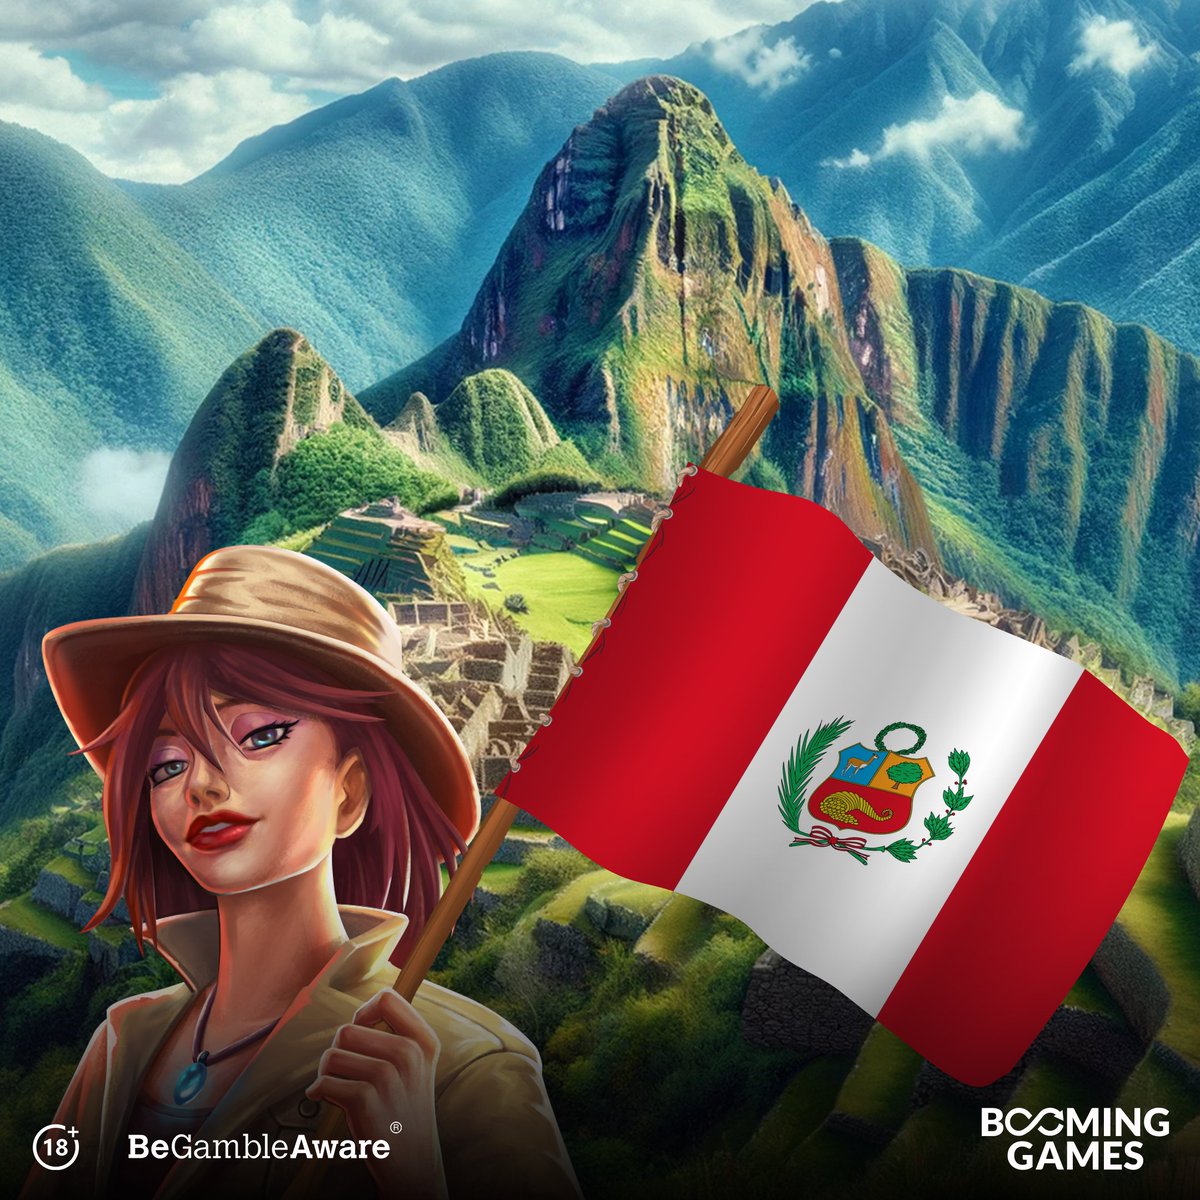 We're thrilled to share that we've successfully completed our registration to operate in Peru! #milestone #expansion#igaming #slots #slotonline #games #slotgame #videoslot #casino #games #casinogames #NewMarket #Peru